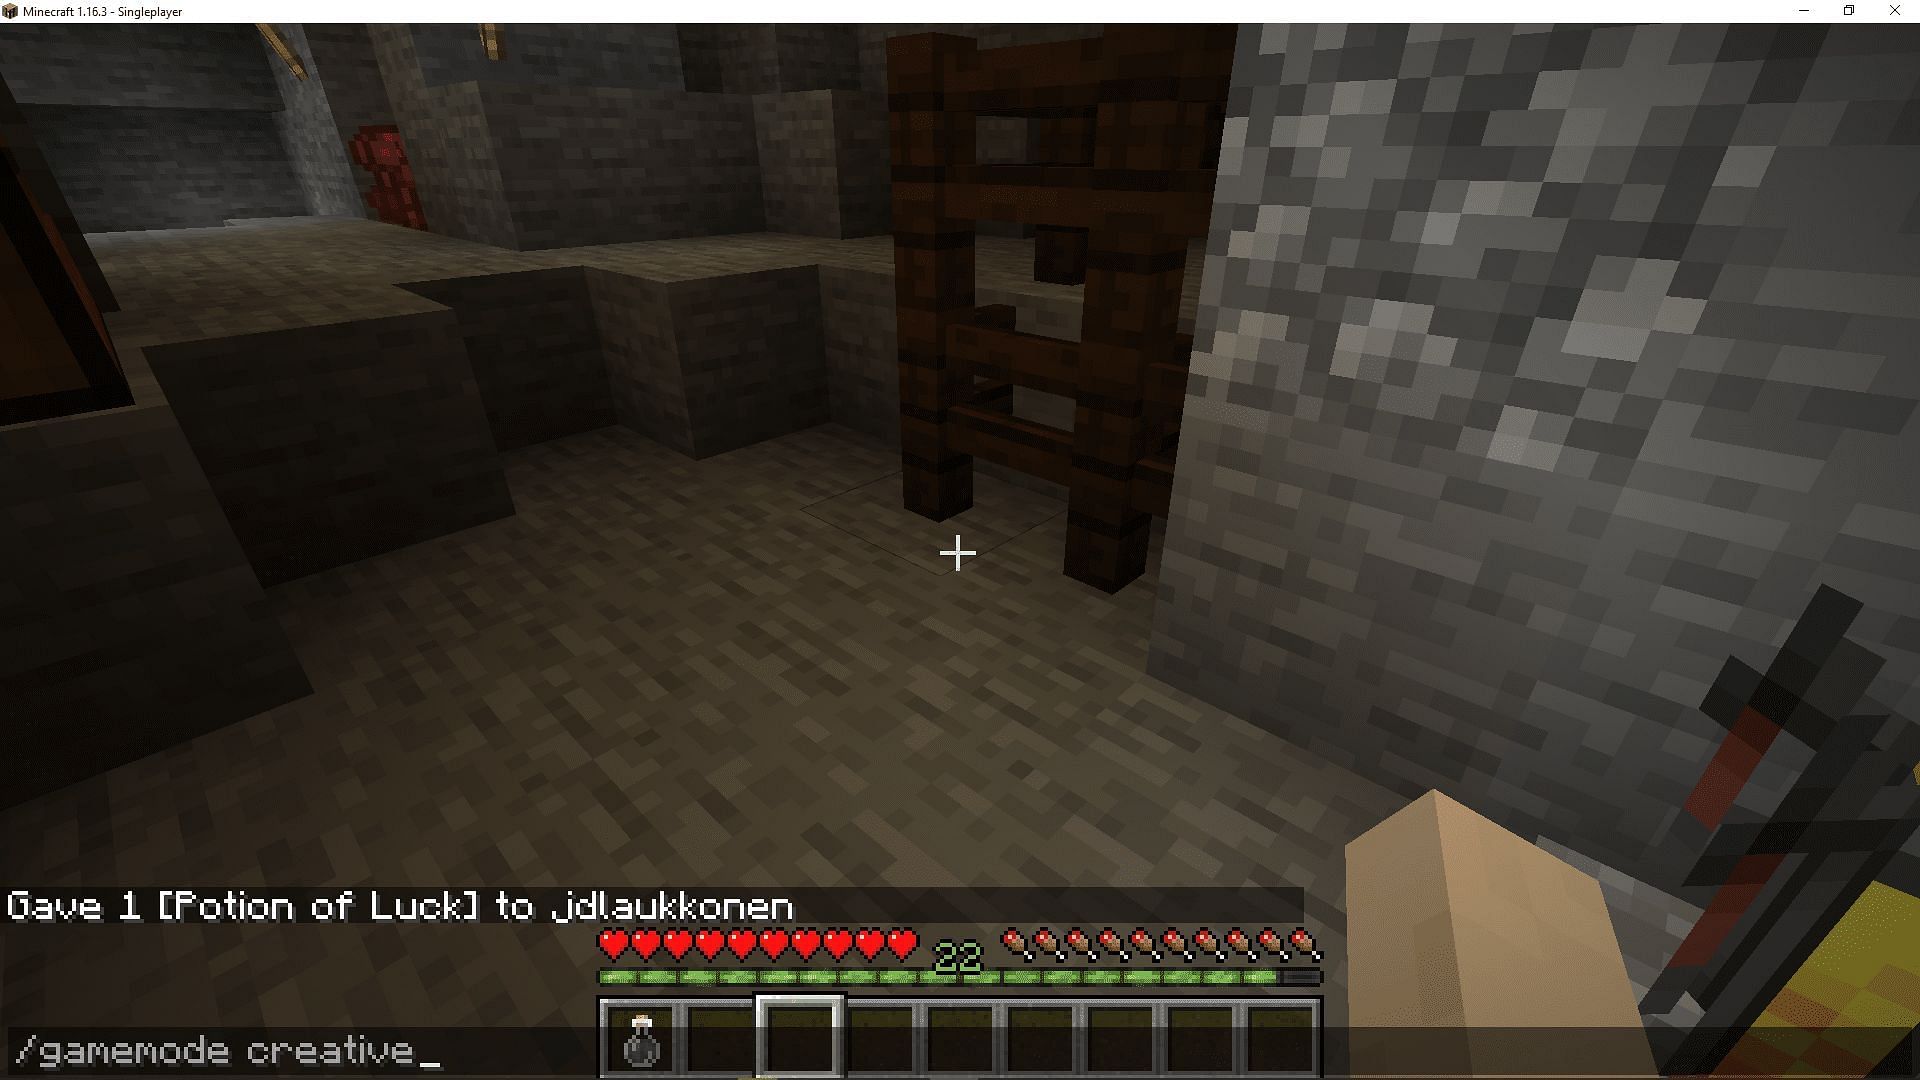 Potion of luck can only be obtained in Java Edition through the use of commands. Image via Minecraft